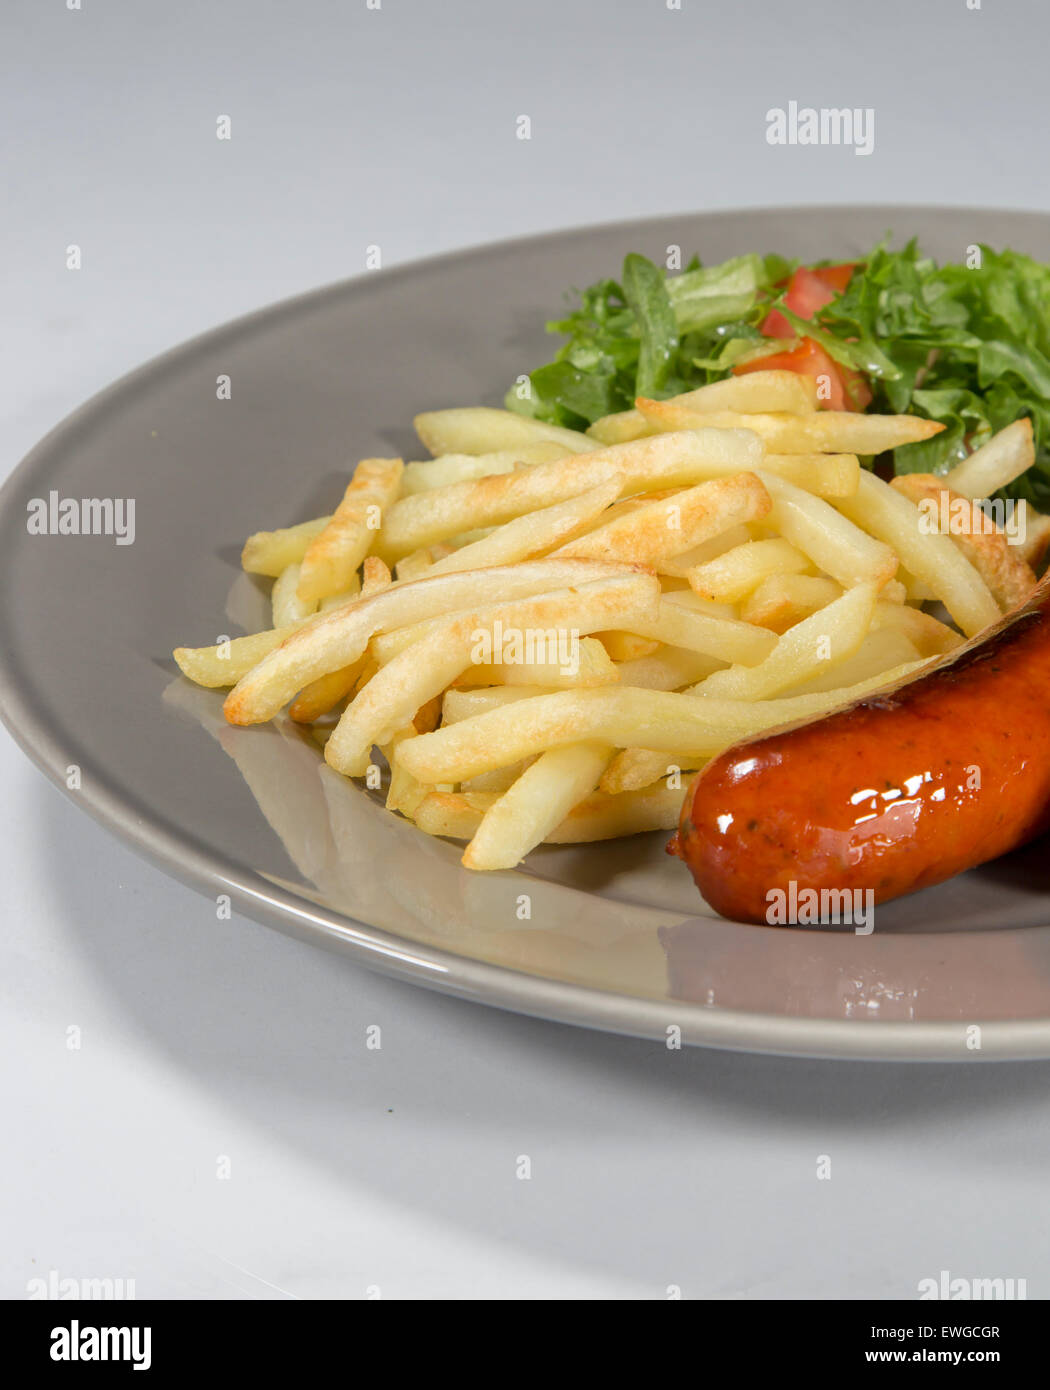 Sausage and French Fries Stock Photo